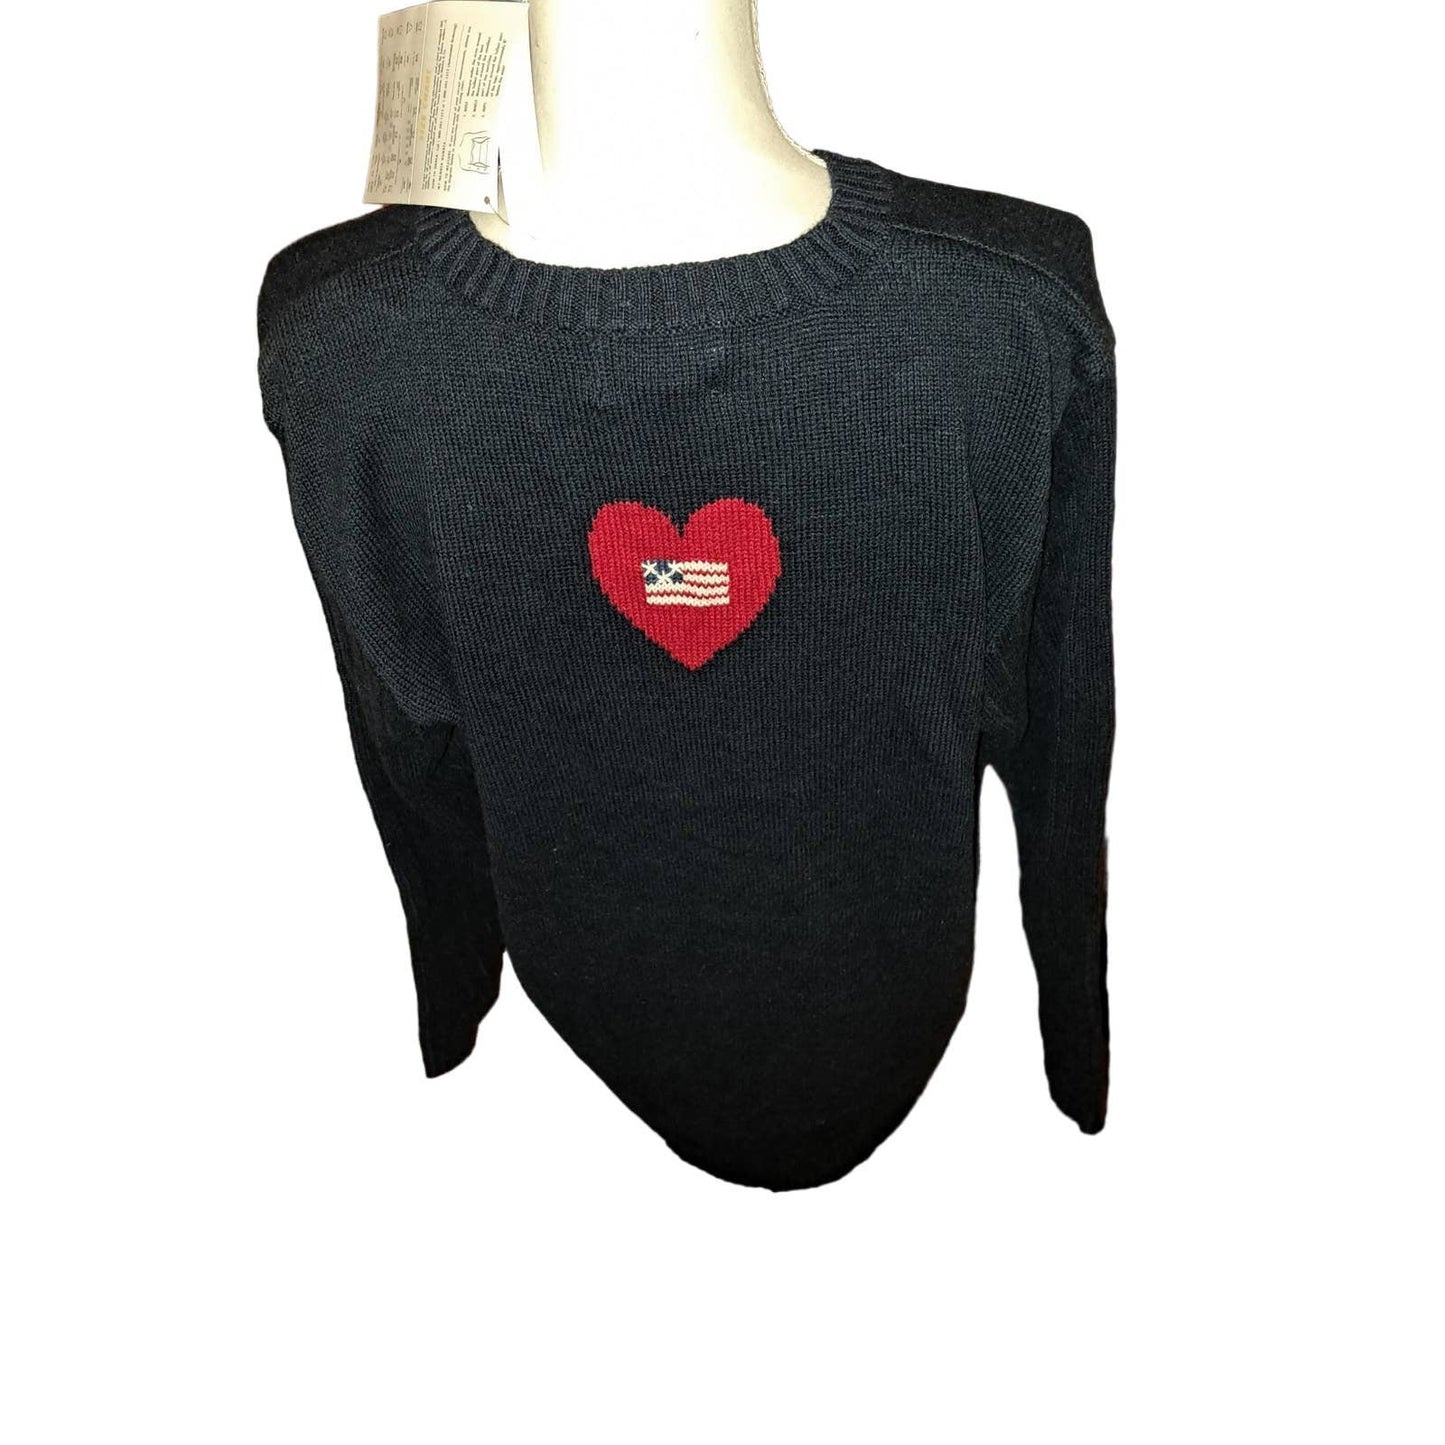 NWT- Large Quacker Factory Navy Blue Red Heart & Flag Large Sweater